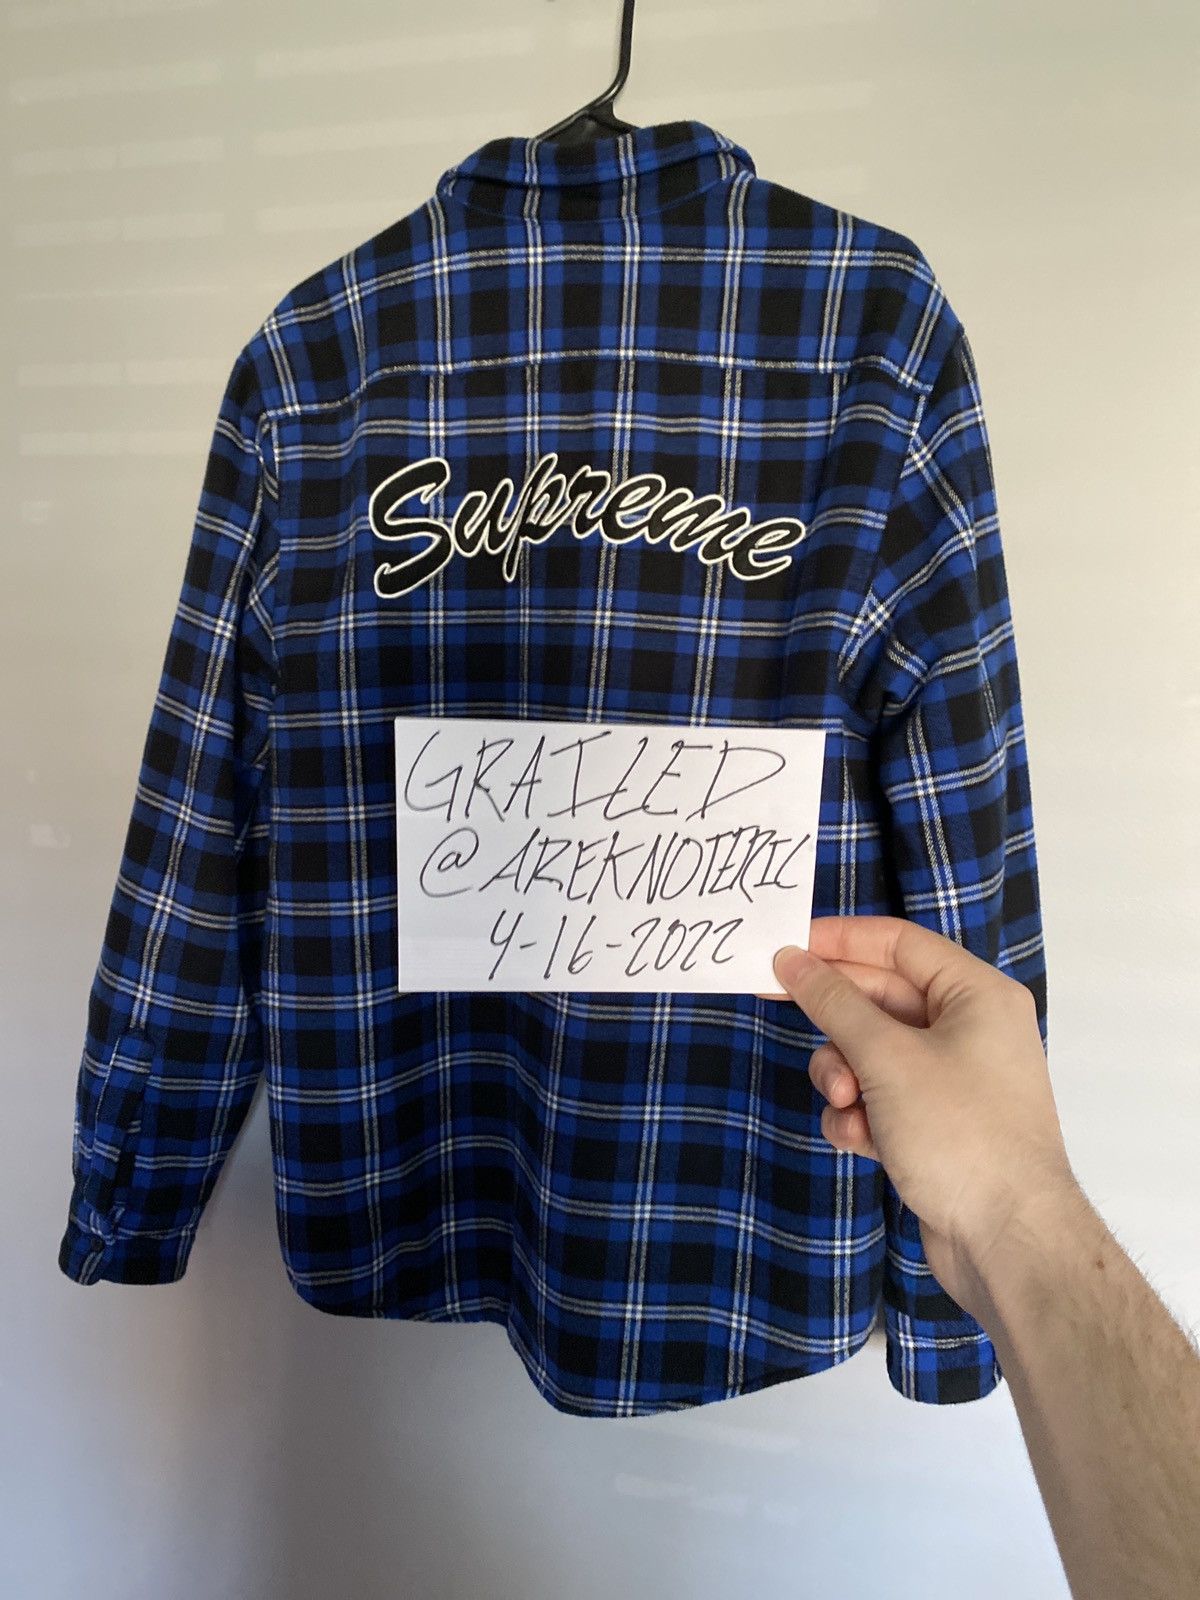 Supreme Supreme Arc Logo Quilted Flannel Shirt   Grailed